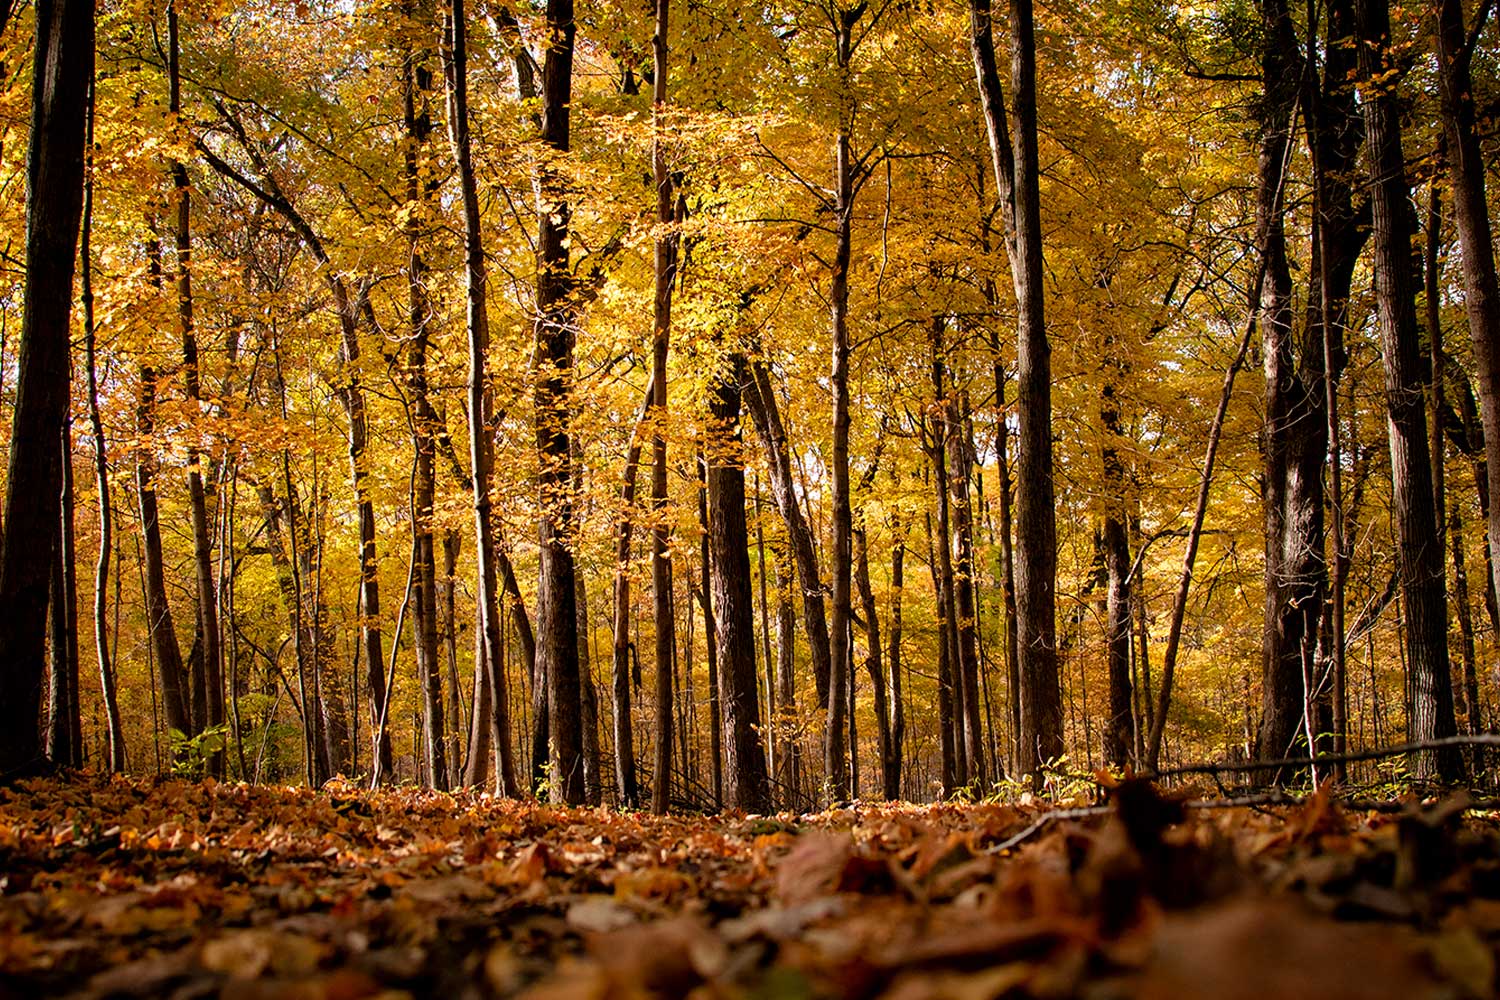 A forest resplendent in fall colors of yellow and orange.